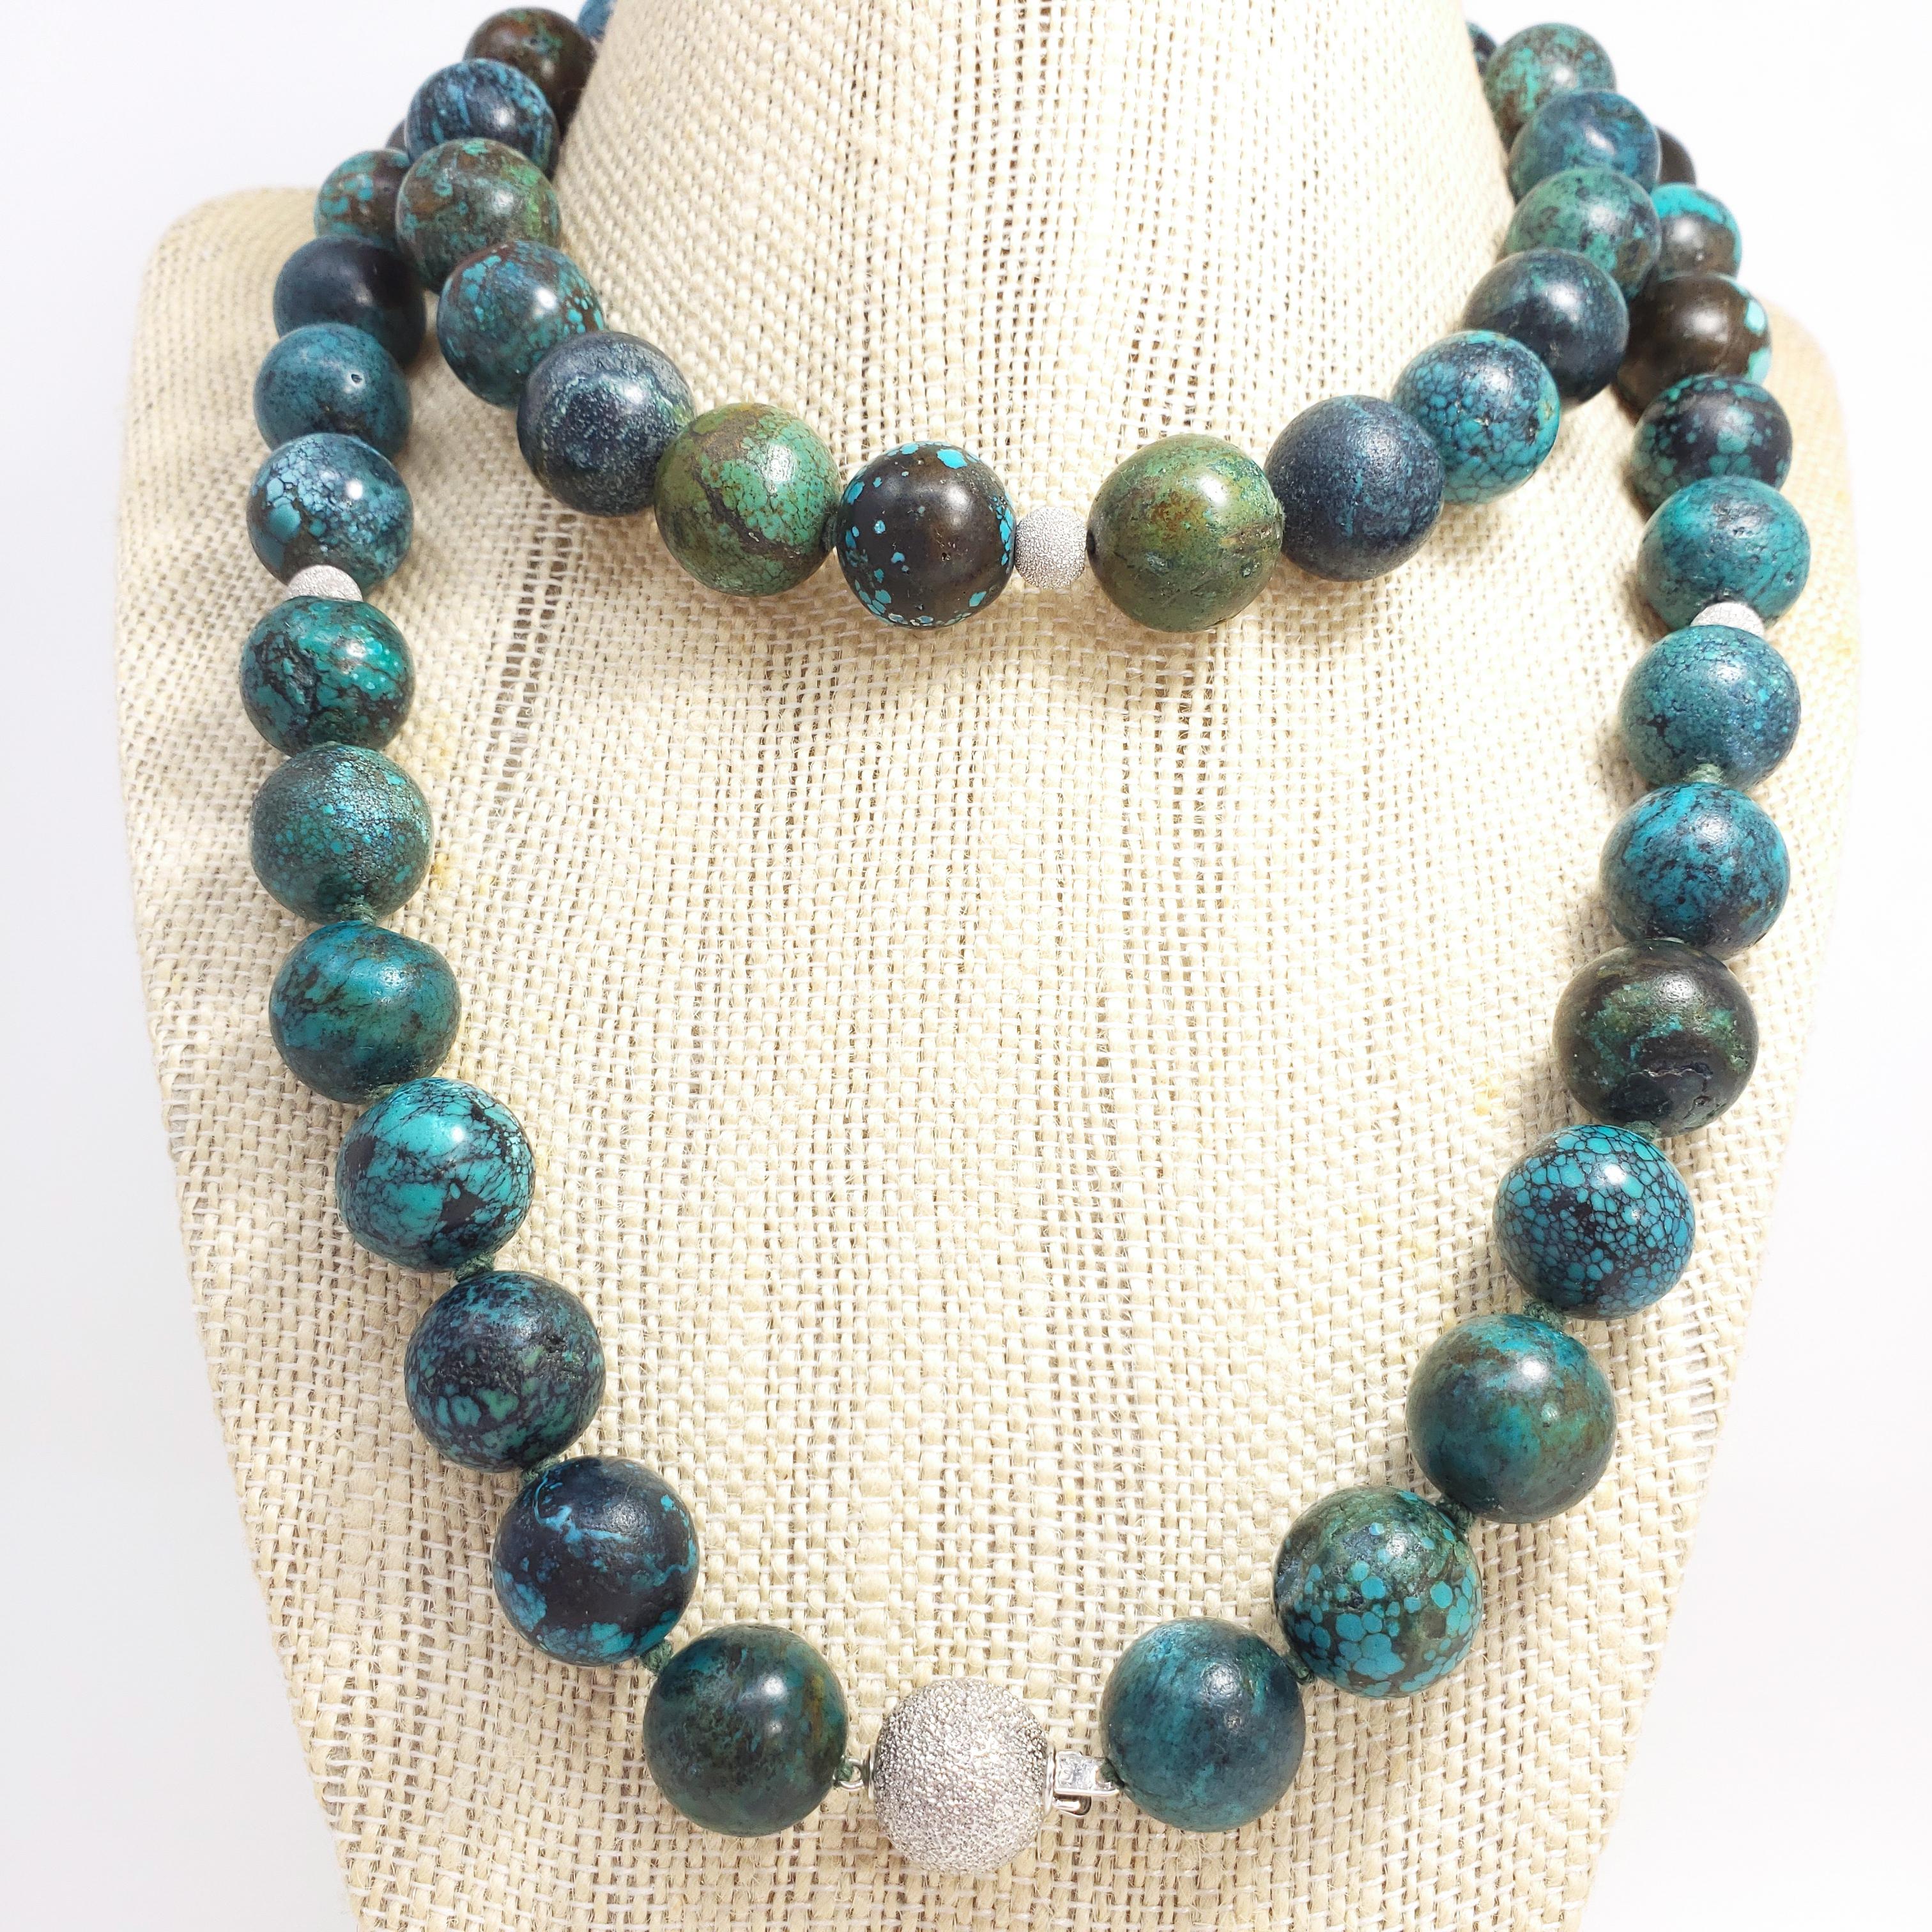 An exquisite Hubei turquoise bead necklace. This 34-inch, knotted string necklace features a series of round, 14mm, turquoise beads with exotic-looking matrix patterns. The polished gemstones are a rich, unique, and vibrant color, and are accented